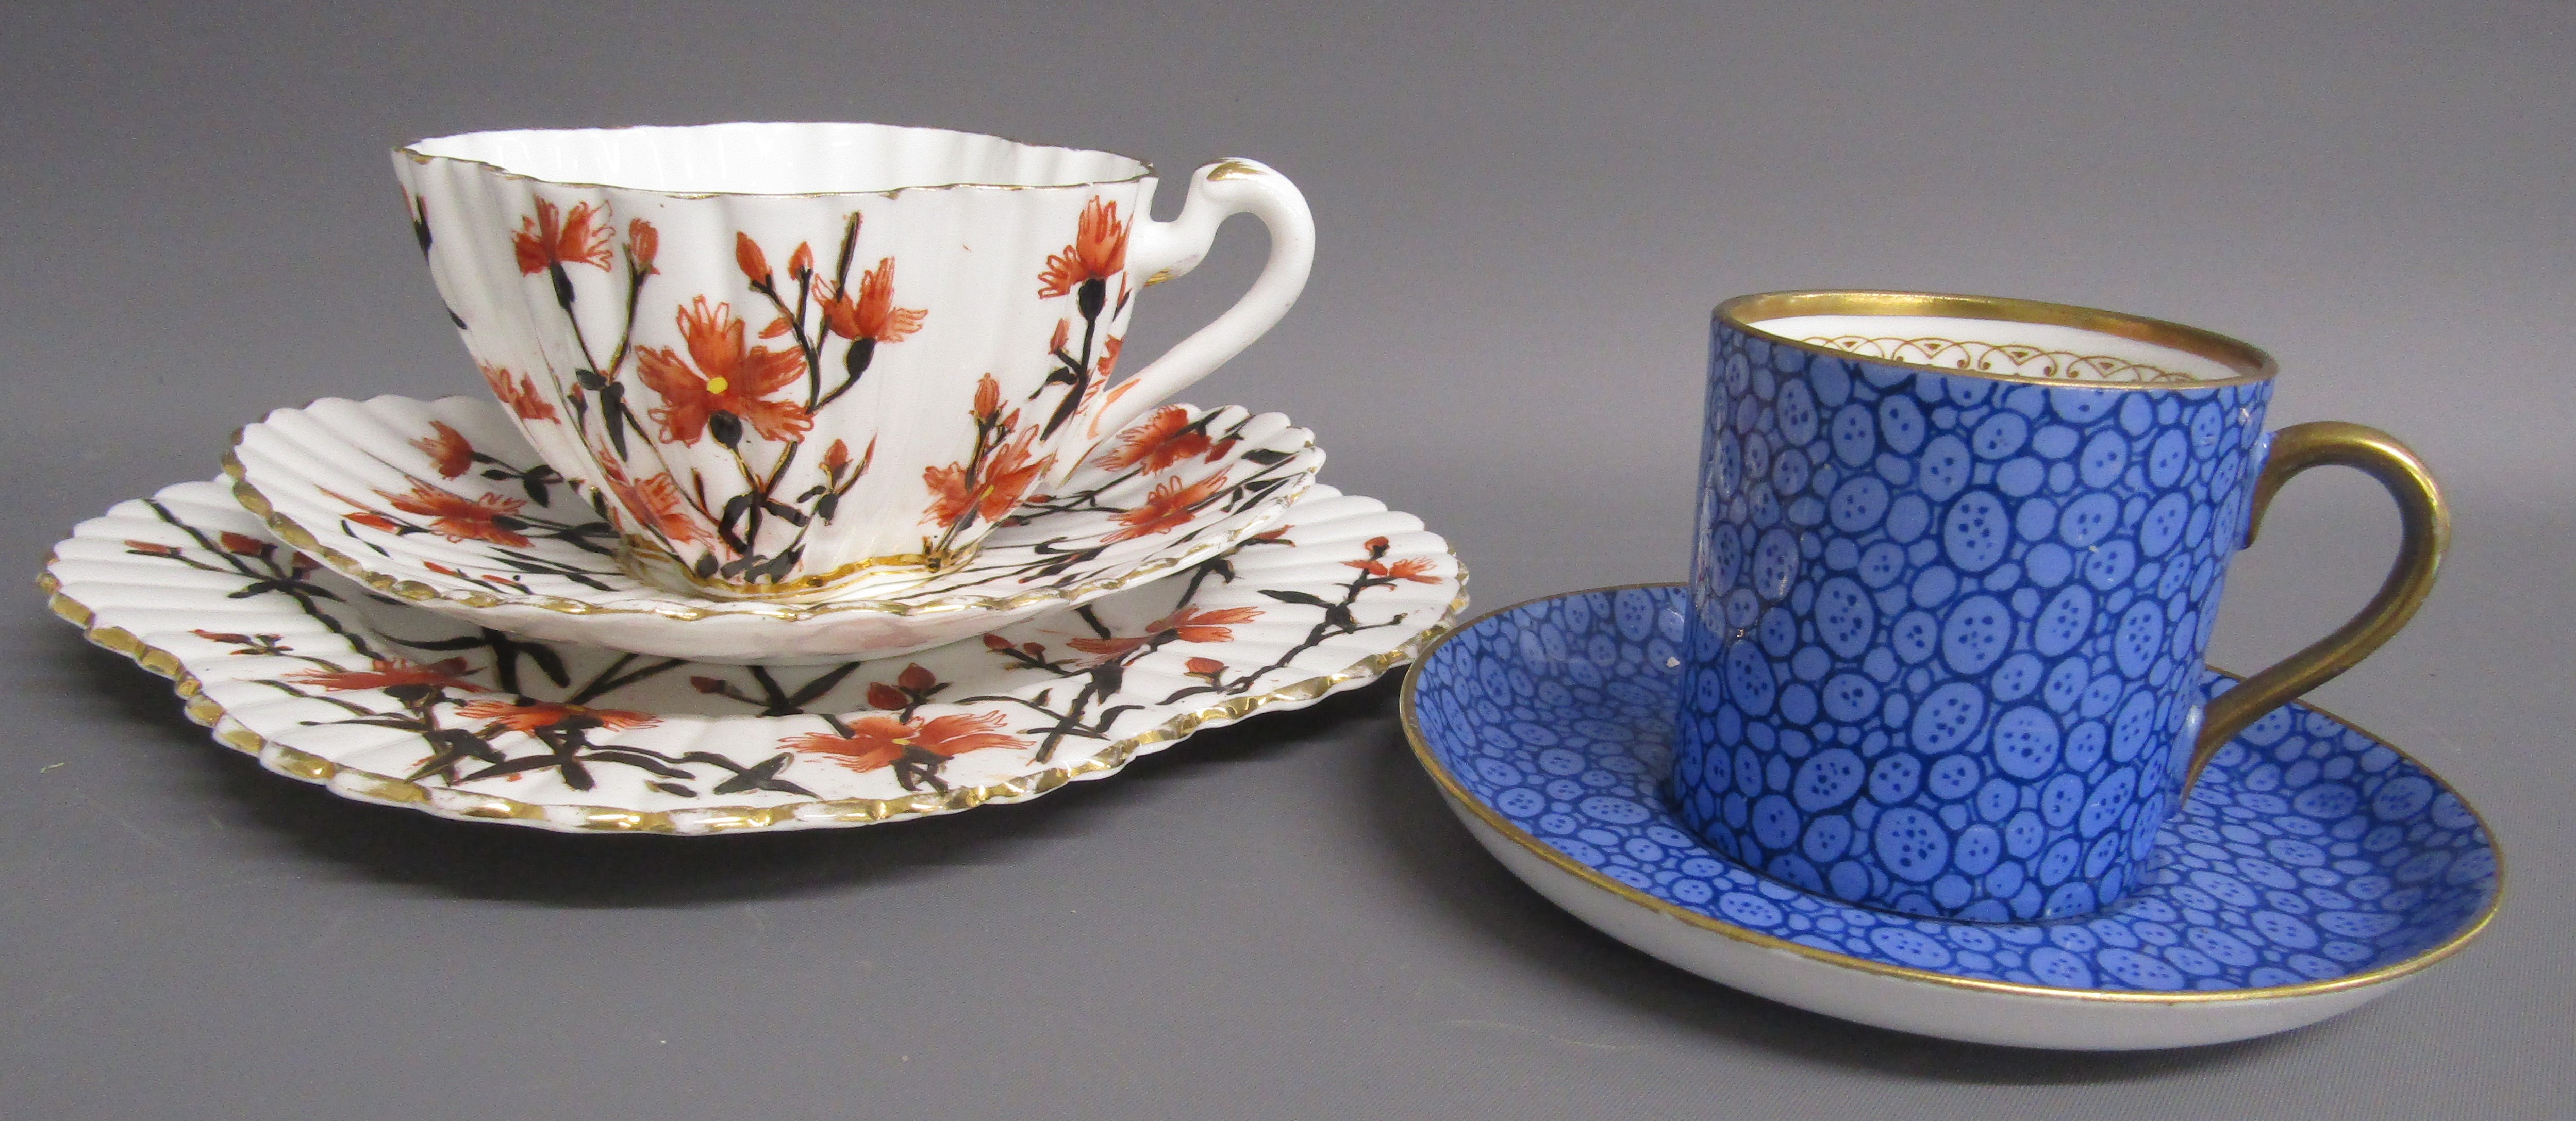 Shelley Wileman 'Cornflower' trio 60650 3730 and Foley cup and saucer in blue and gold design